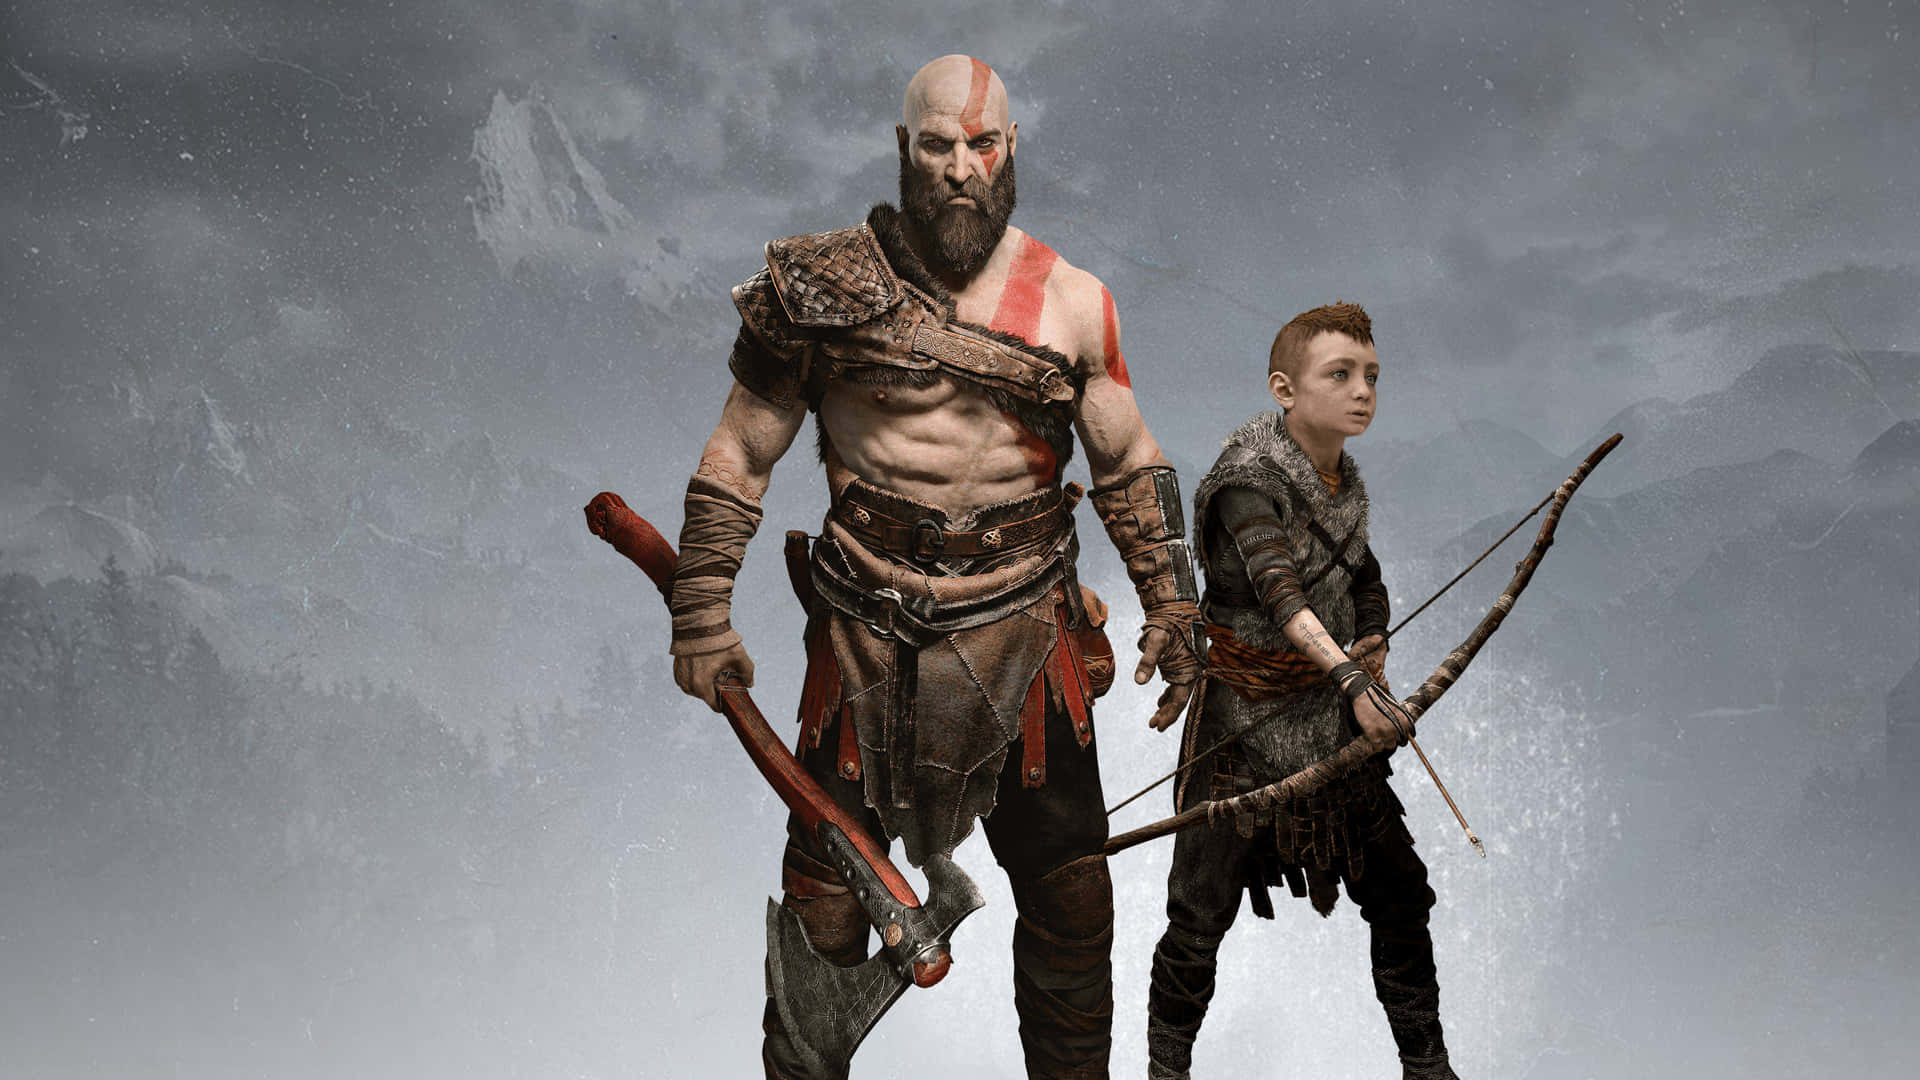 Epic battle scene featuring Kratos and Atreus from God of War Wallpaper